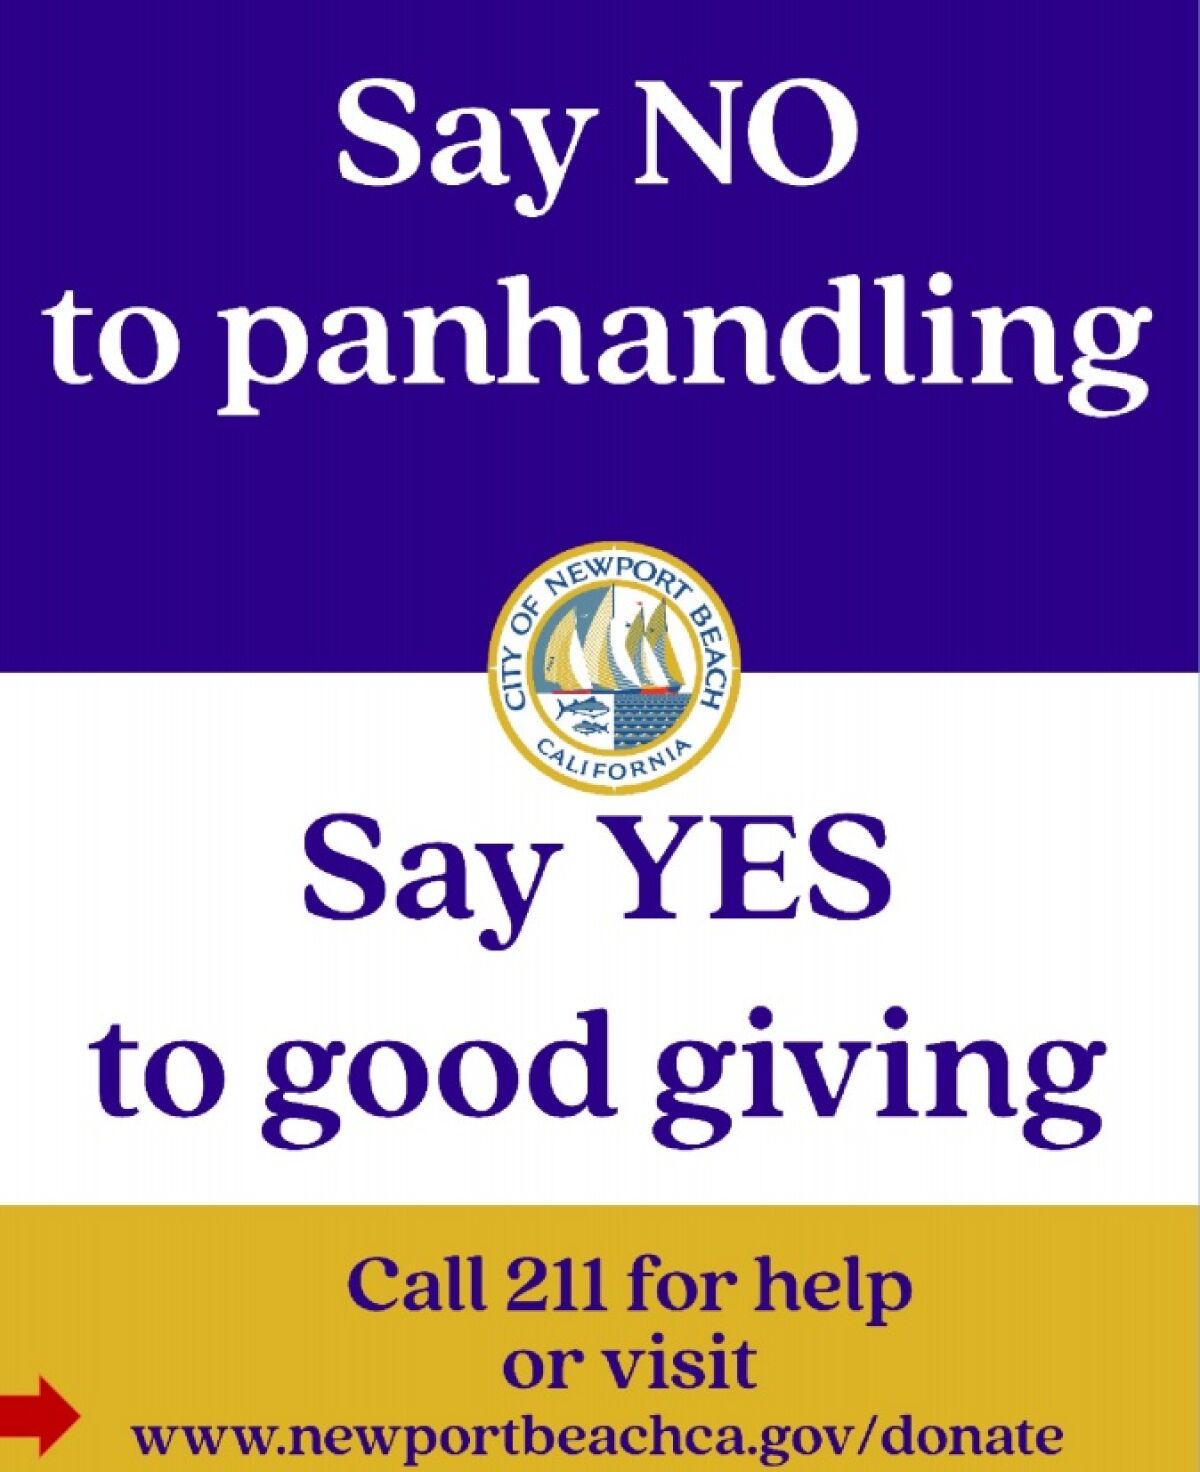 This sign may be posted at several Newport Beach locations to discourage giving to panhandlers.